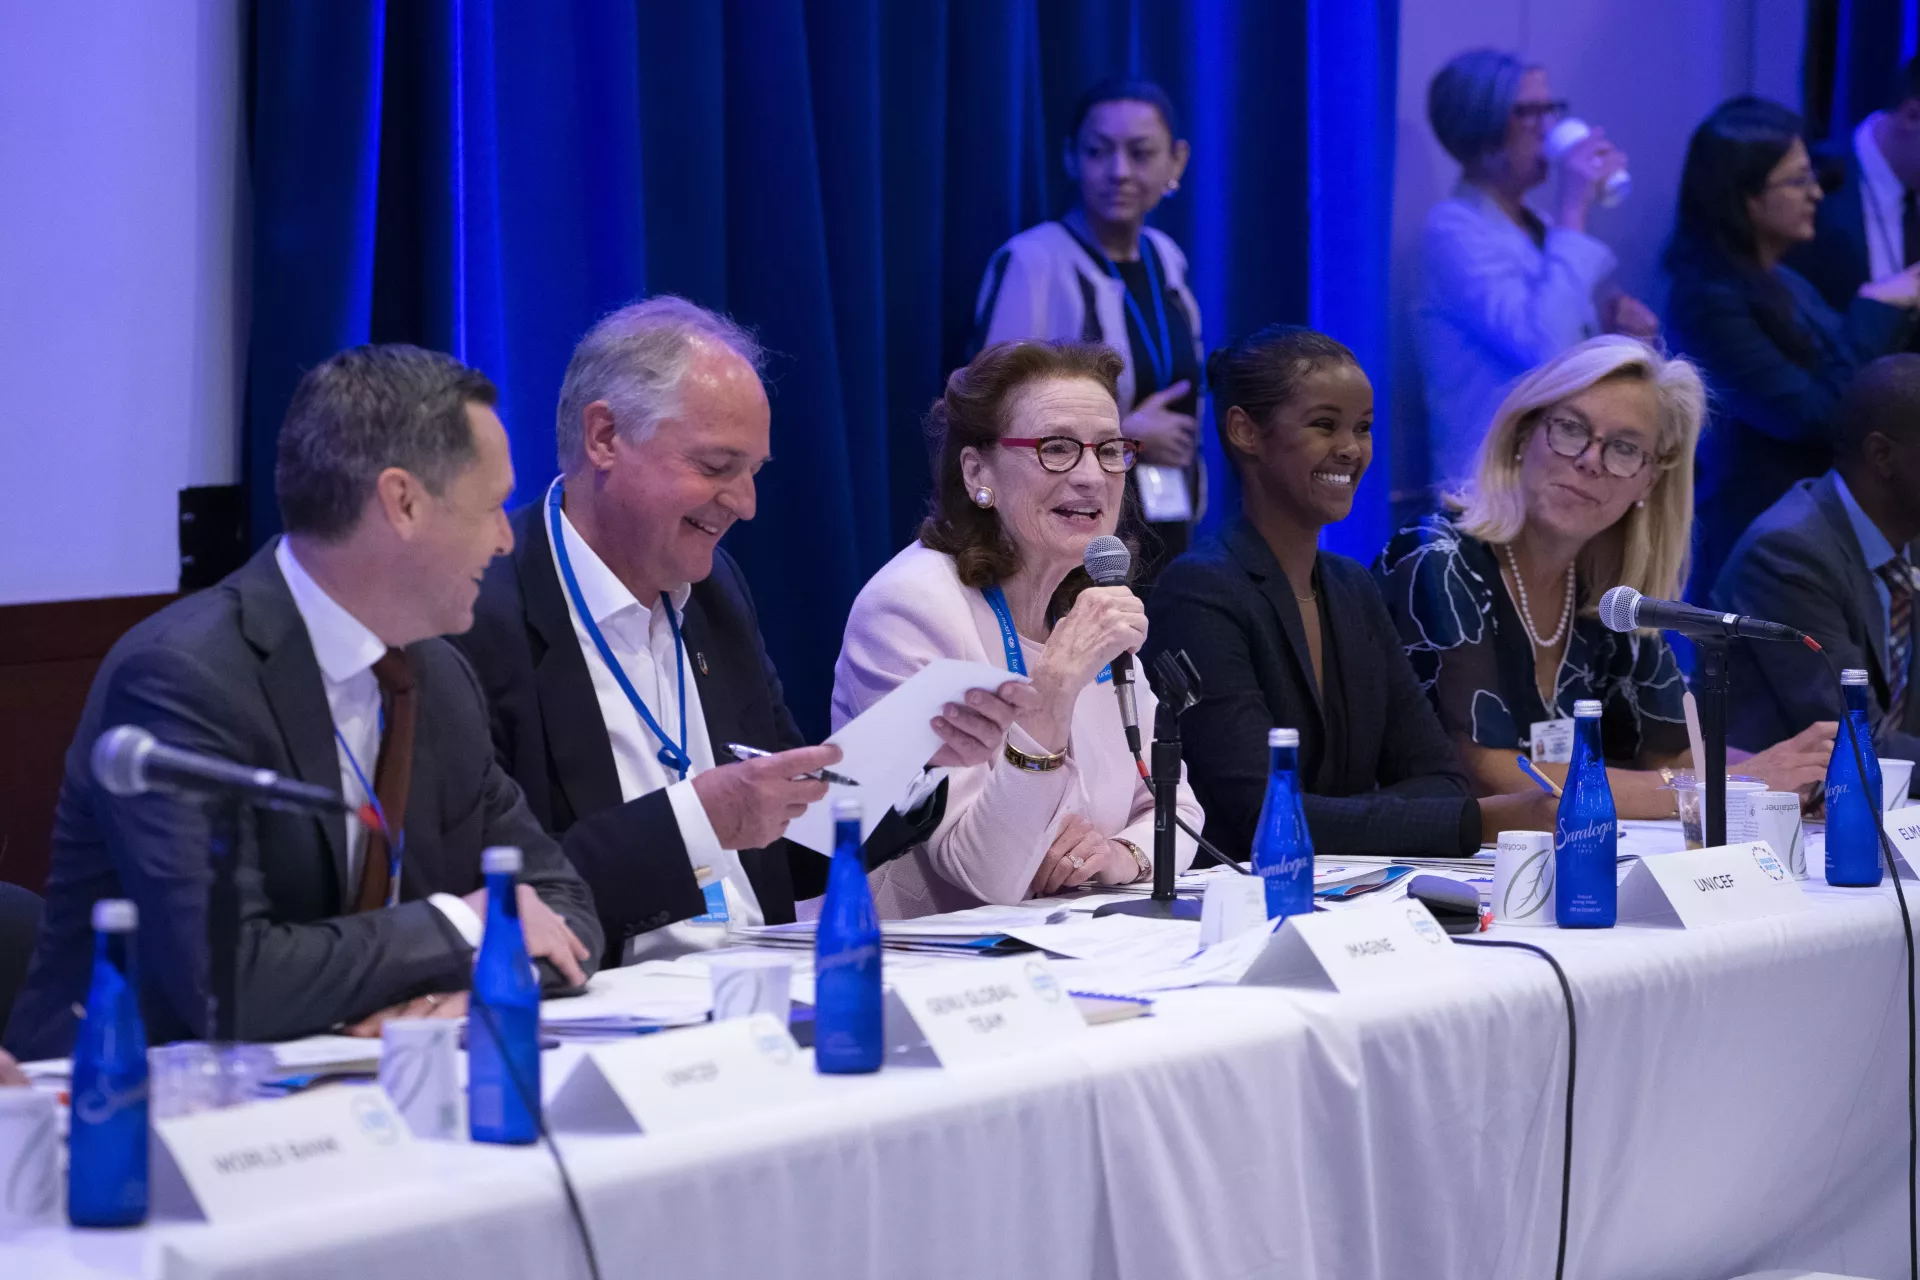 UNICEF Executive Director Henriette H. Fore speaks during the Third Global Board Meeting of Generation Unlimited on 23 September 2019 at UNICEF House in New York.